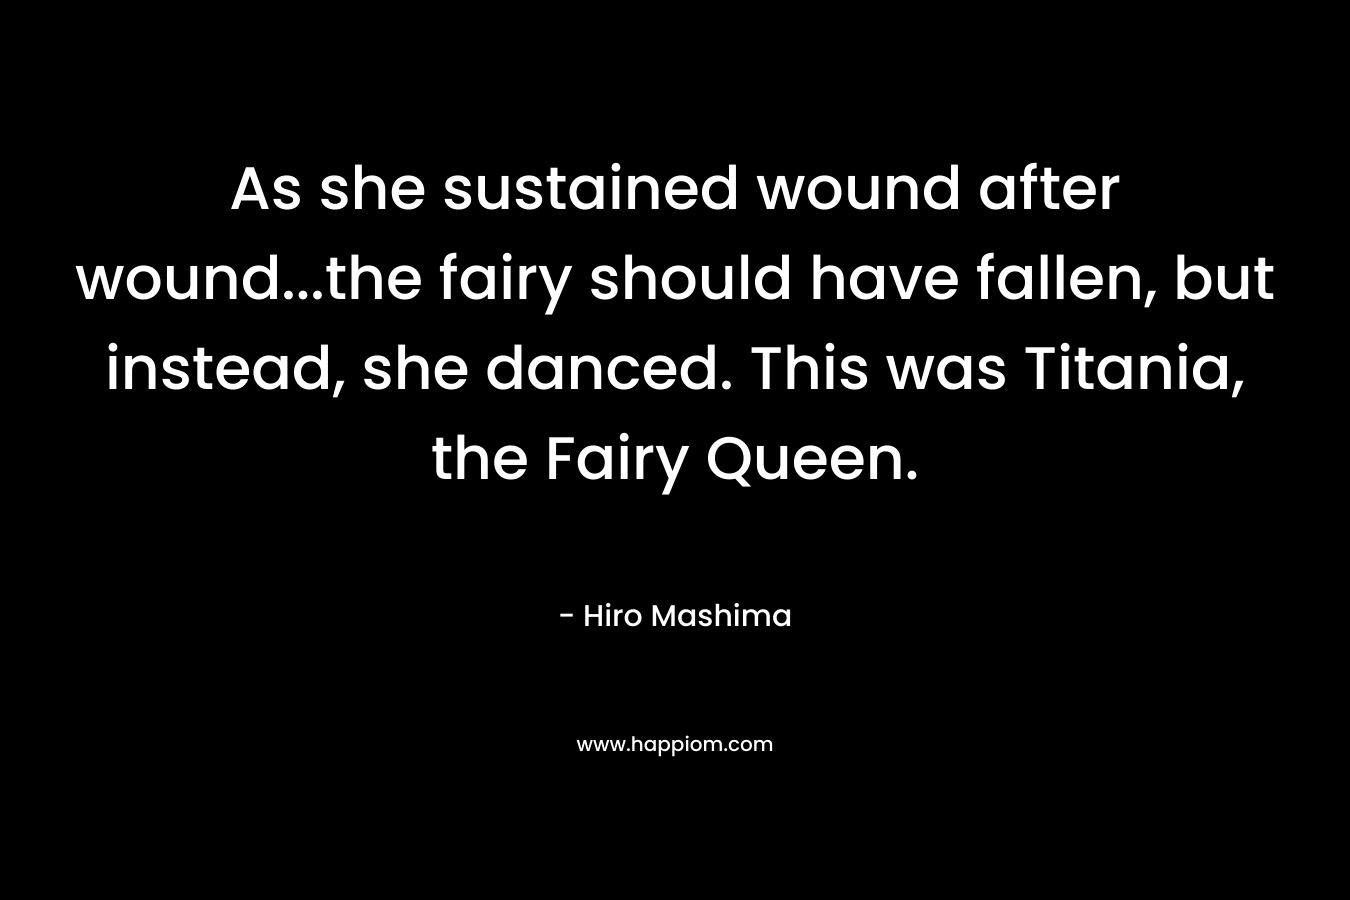 As she sustained wound after wound…the fairy should have fallen, but instead, she danced. This was Titania, the Fairy Queen. – Hiro Mashima